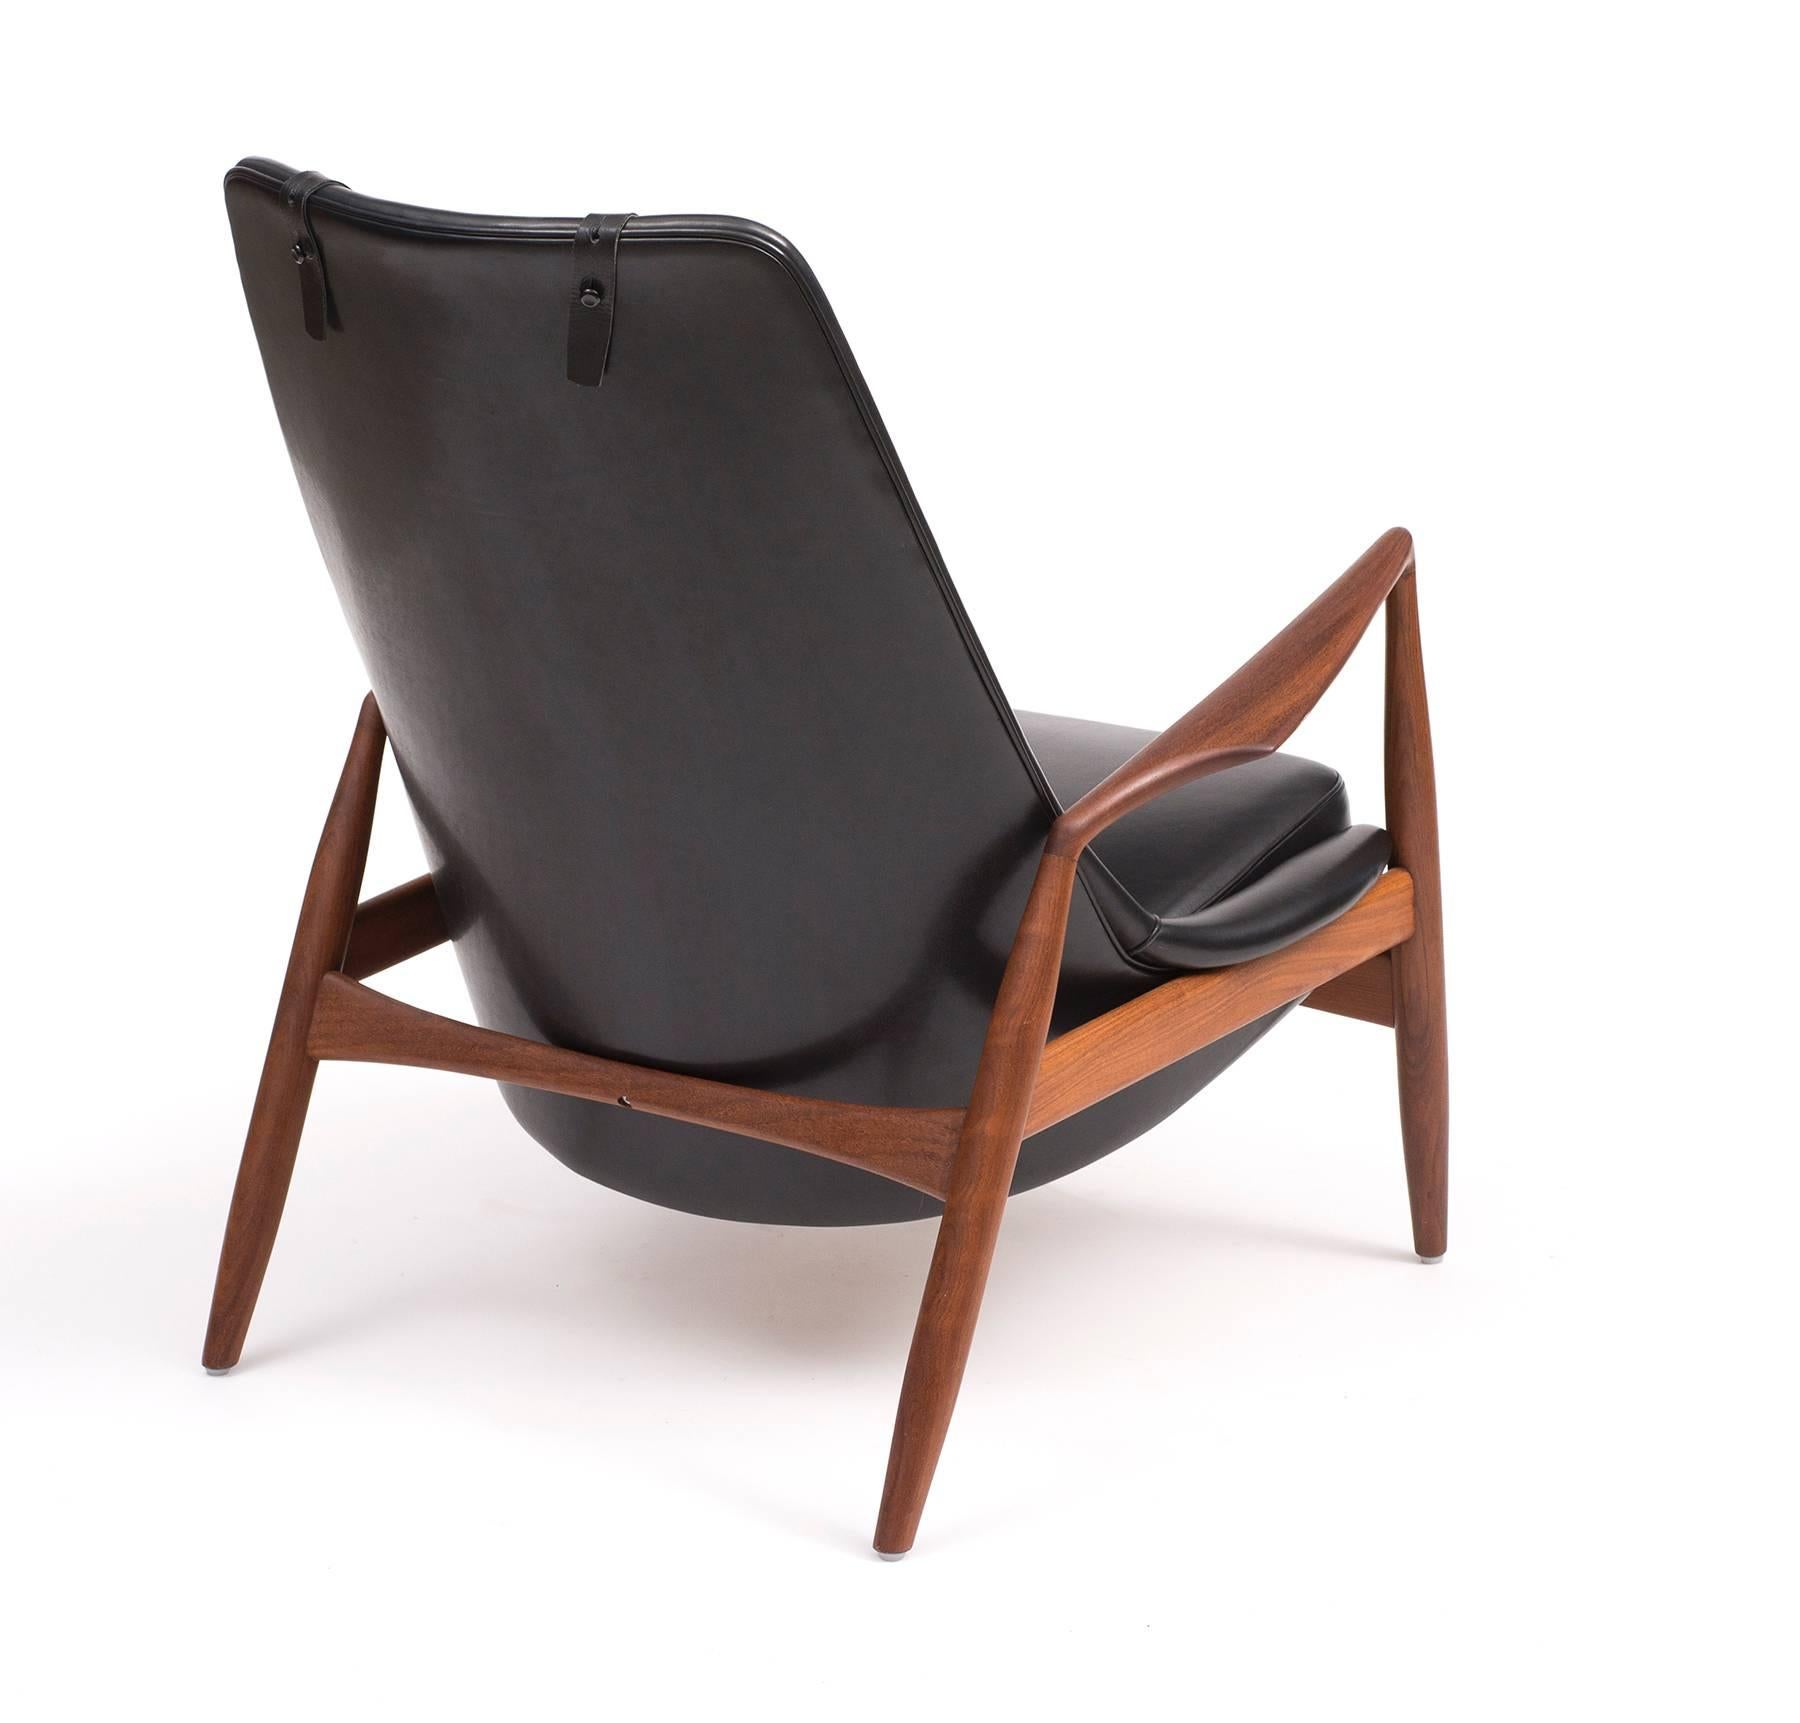 Scandinavian Modern Ib Kofod-Larsen High Back Seal Chair in Teak and Black Leather for OPE, 1960s For Sale